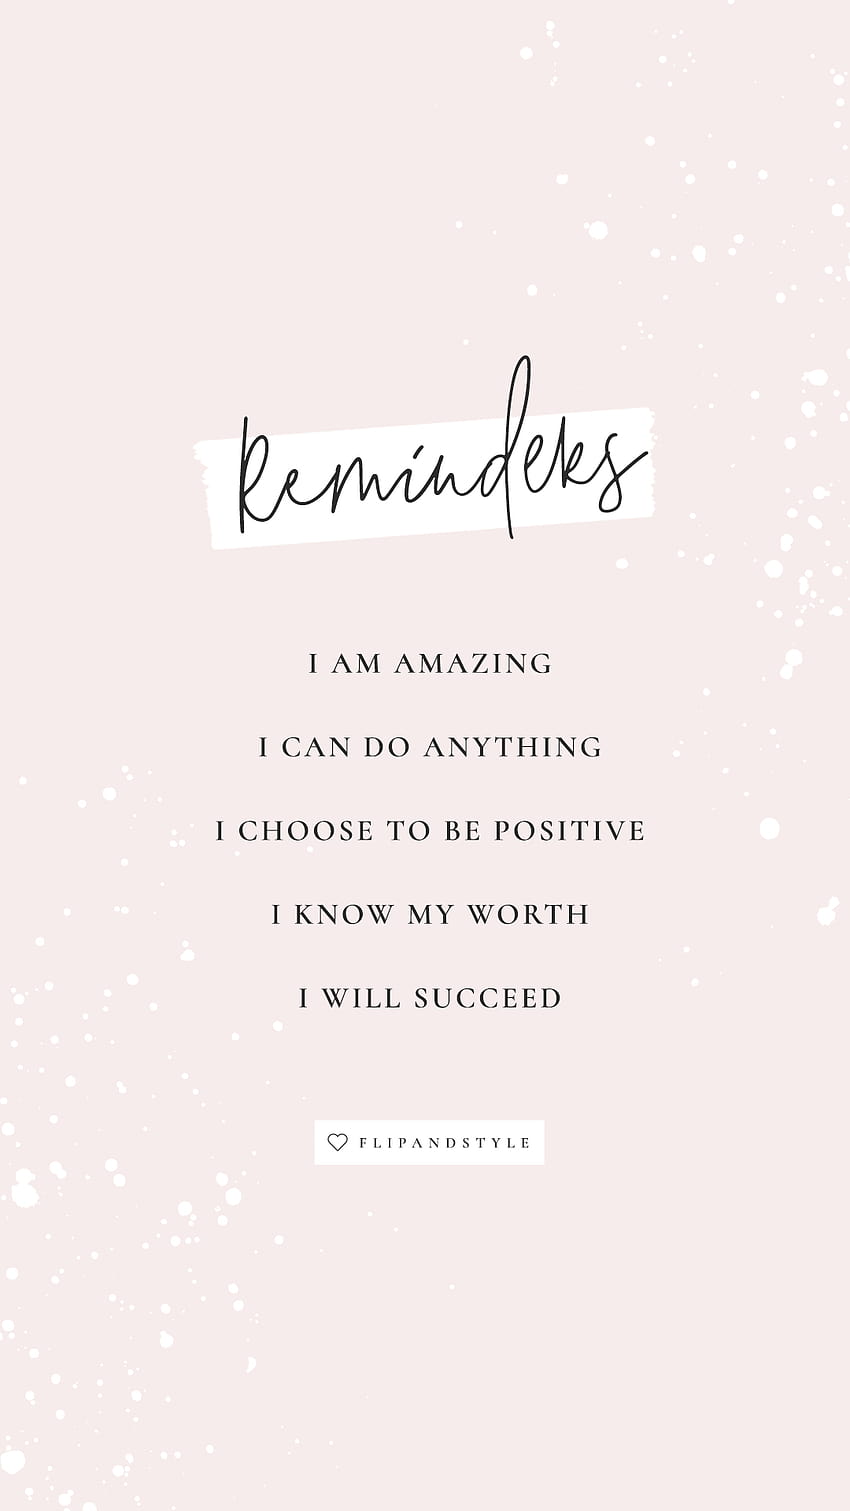 Inspirational SelfLove Quotes For Women  50 Free Phone Wallpapers 